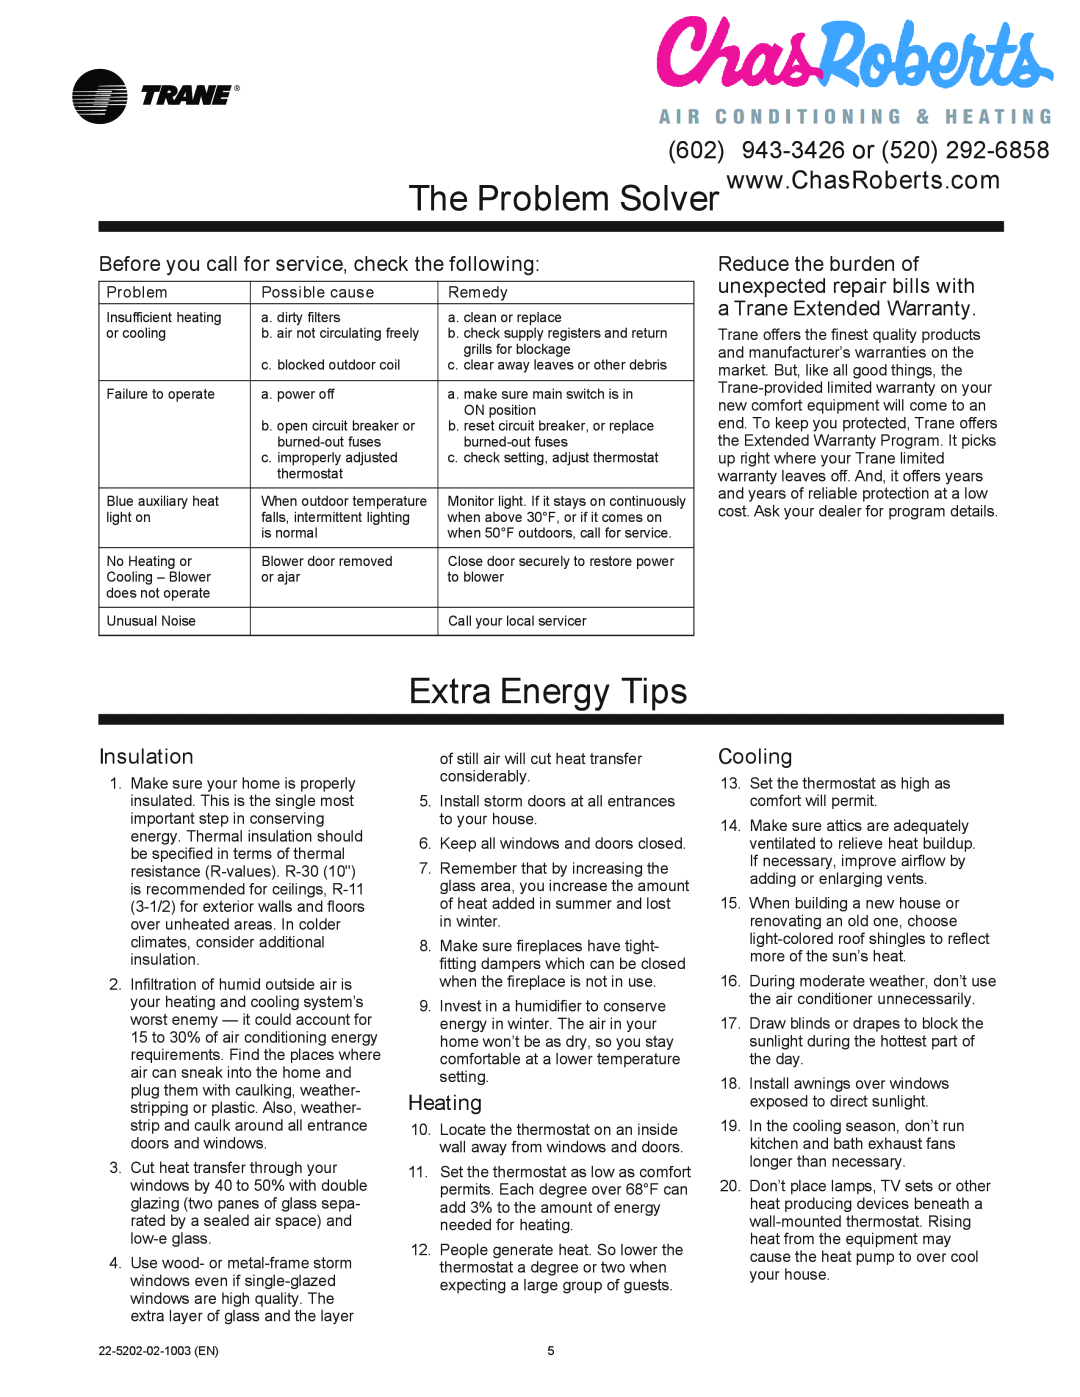 Trane 22-5202-03-3605 manual Extra Energy Tips, 602943-3426or, Insulation, Heating, Cooling 